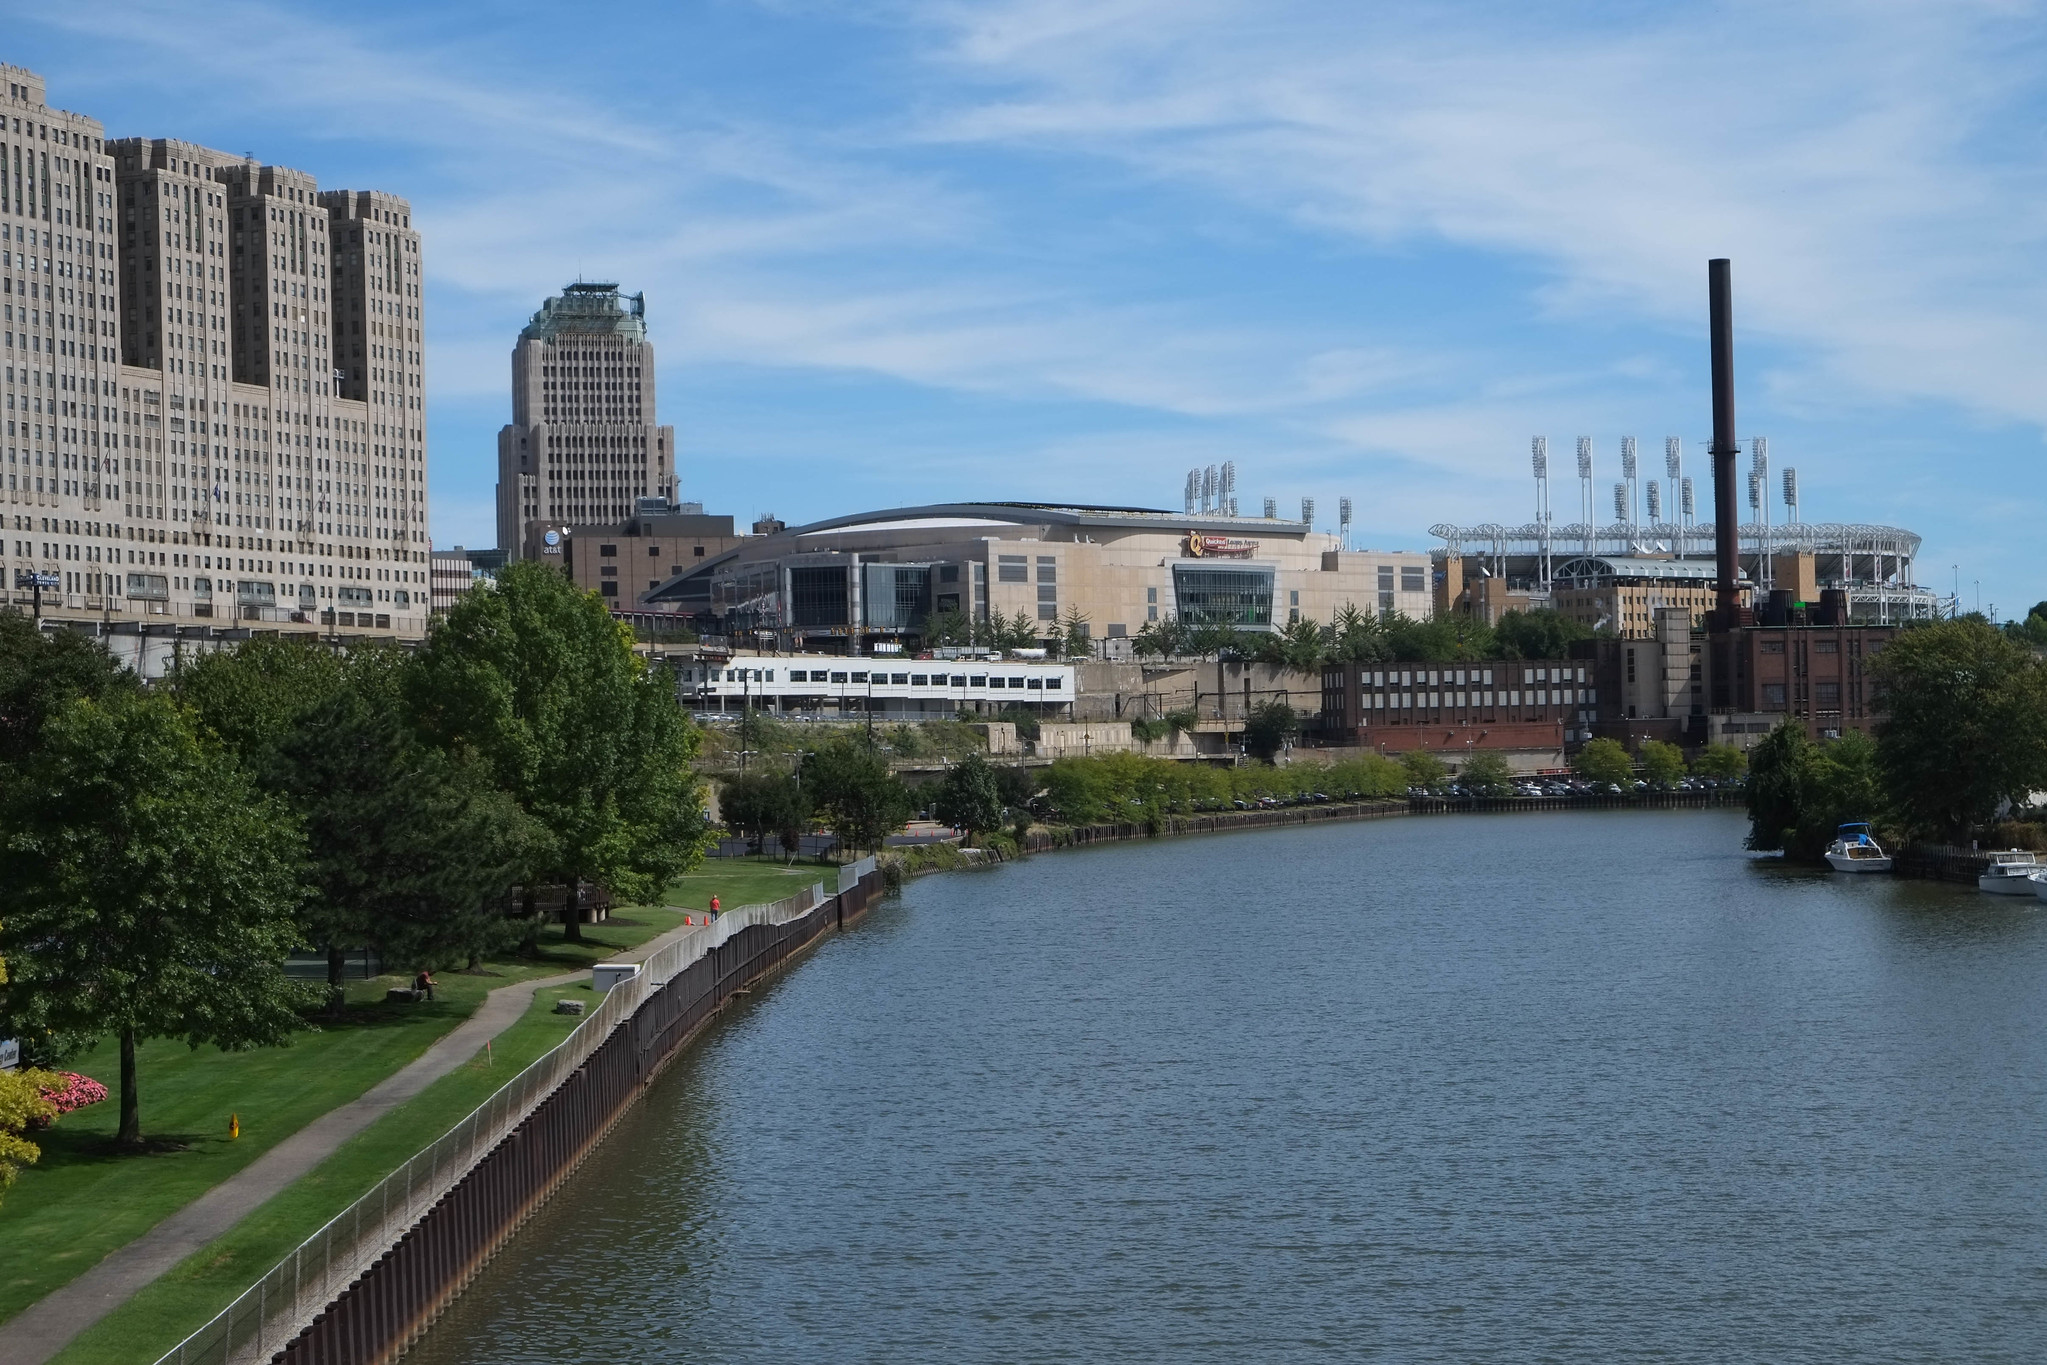 Under a clear blue sky, a river fills the foreground and a city skyline fills the background.